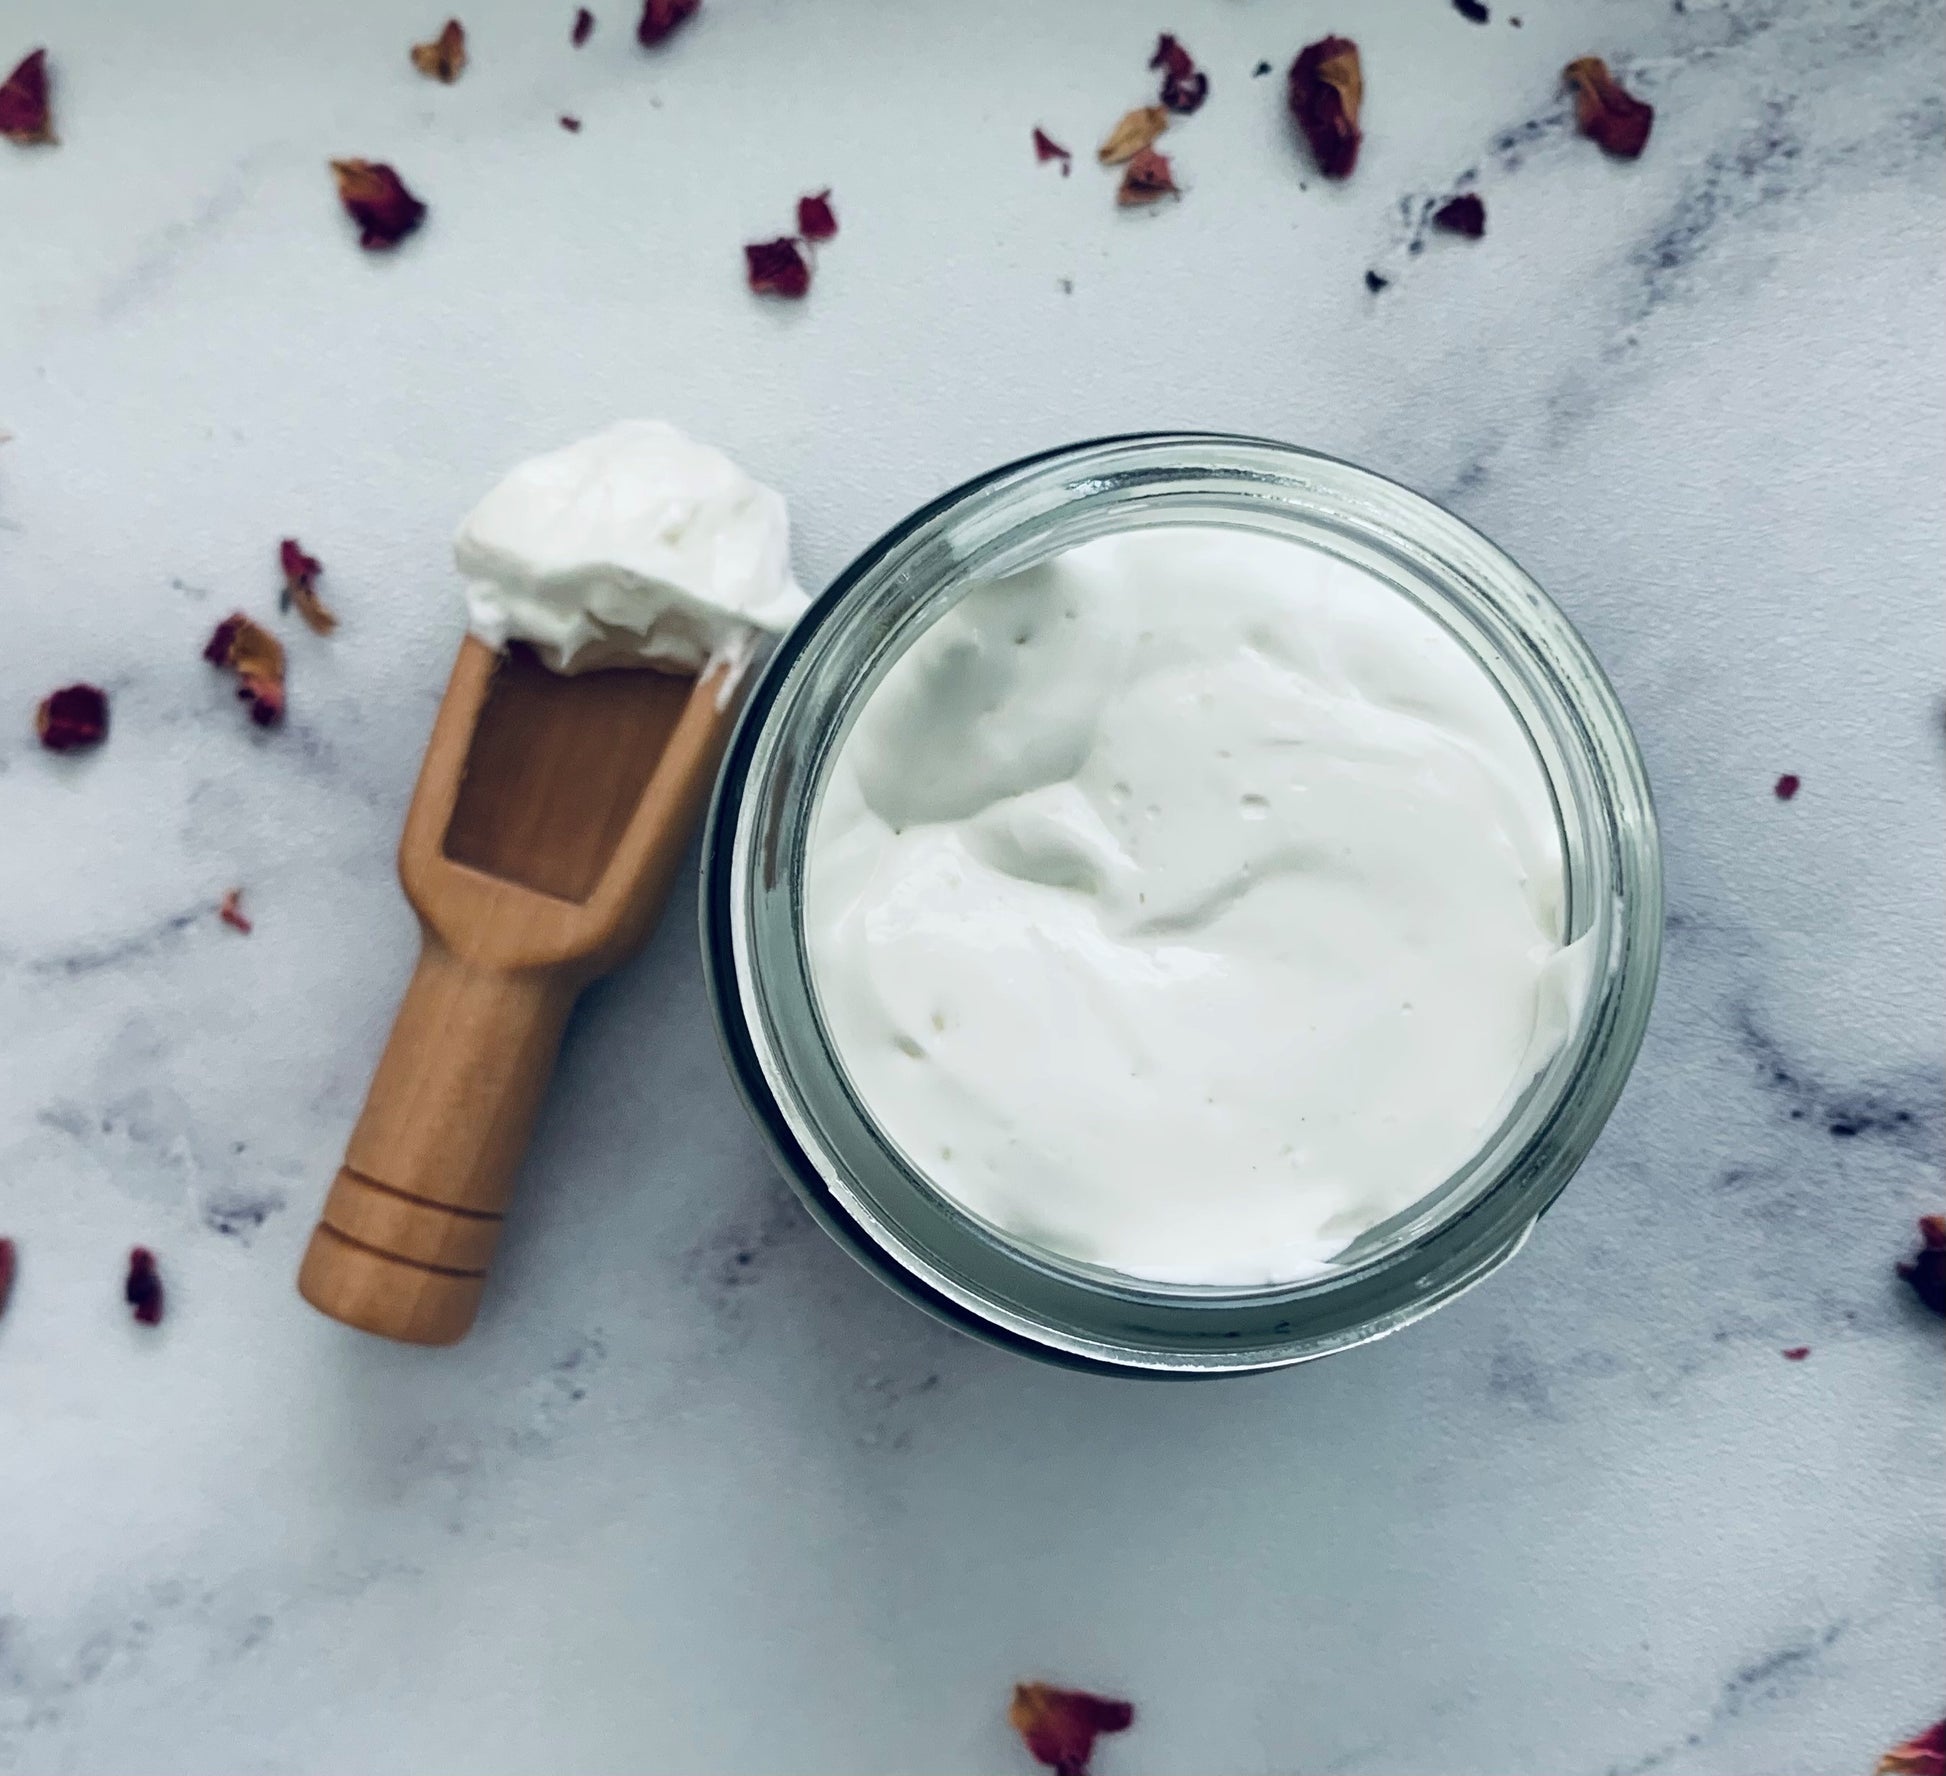 Lavender and Rose Geranium Hemp Infused Hand-whipped Body Butter by Kanna Botana